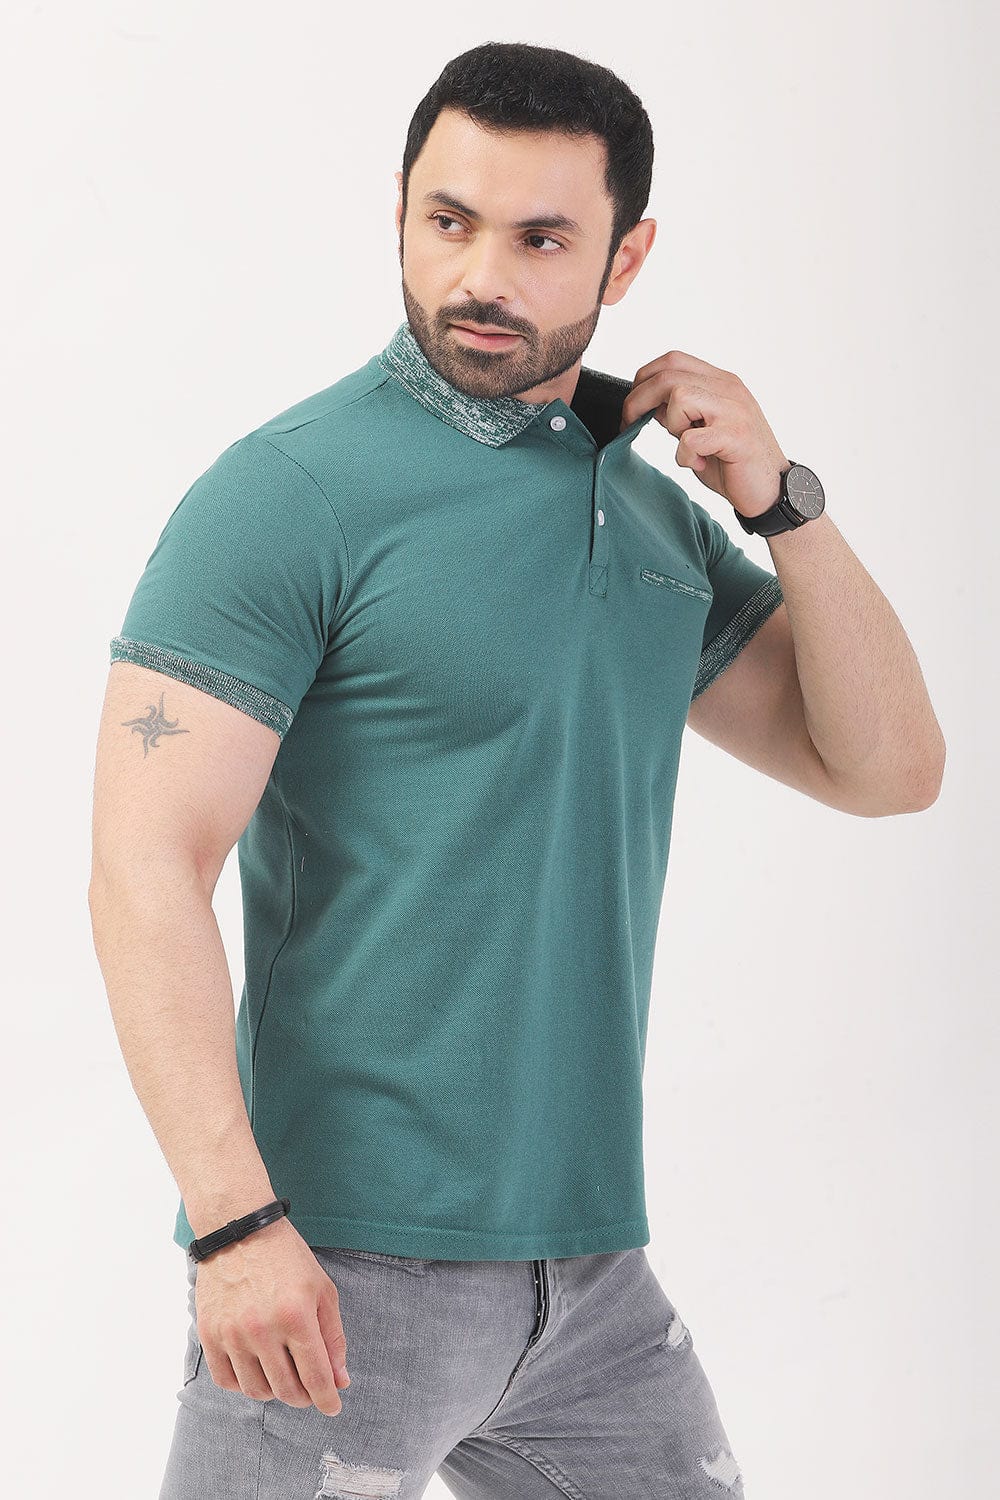 Hope Not Out by Shahid Afridi Men Polo Shirt Fashion Polo with Contrast Collar and Rib